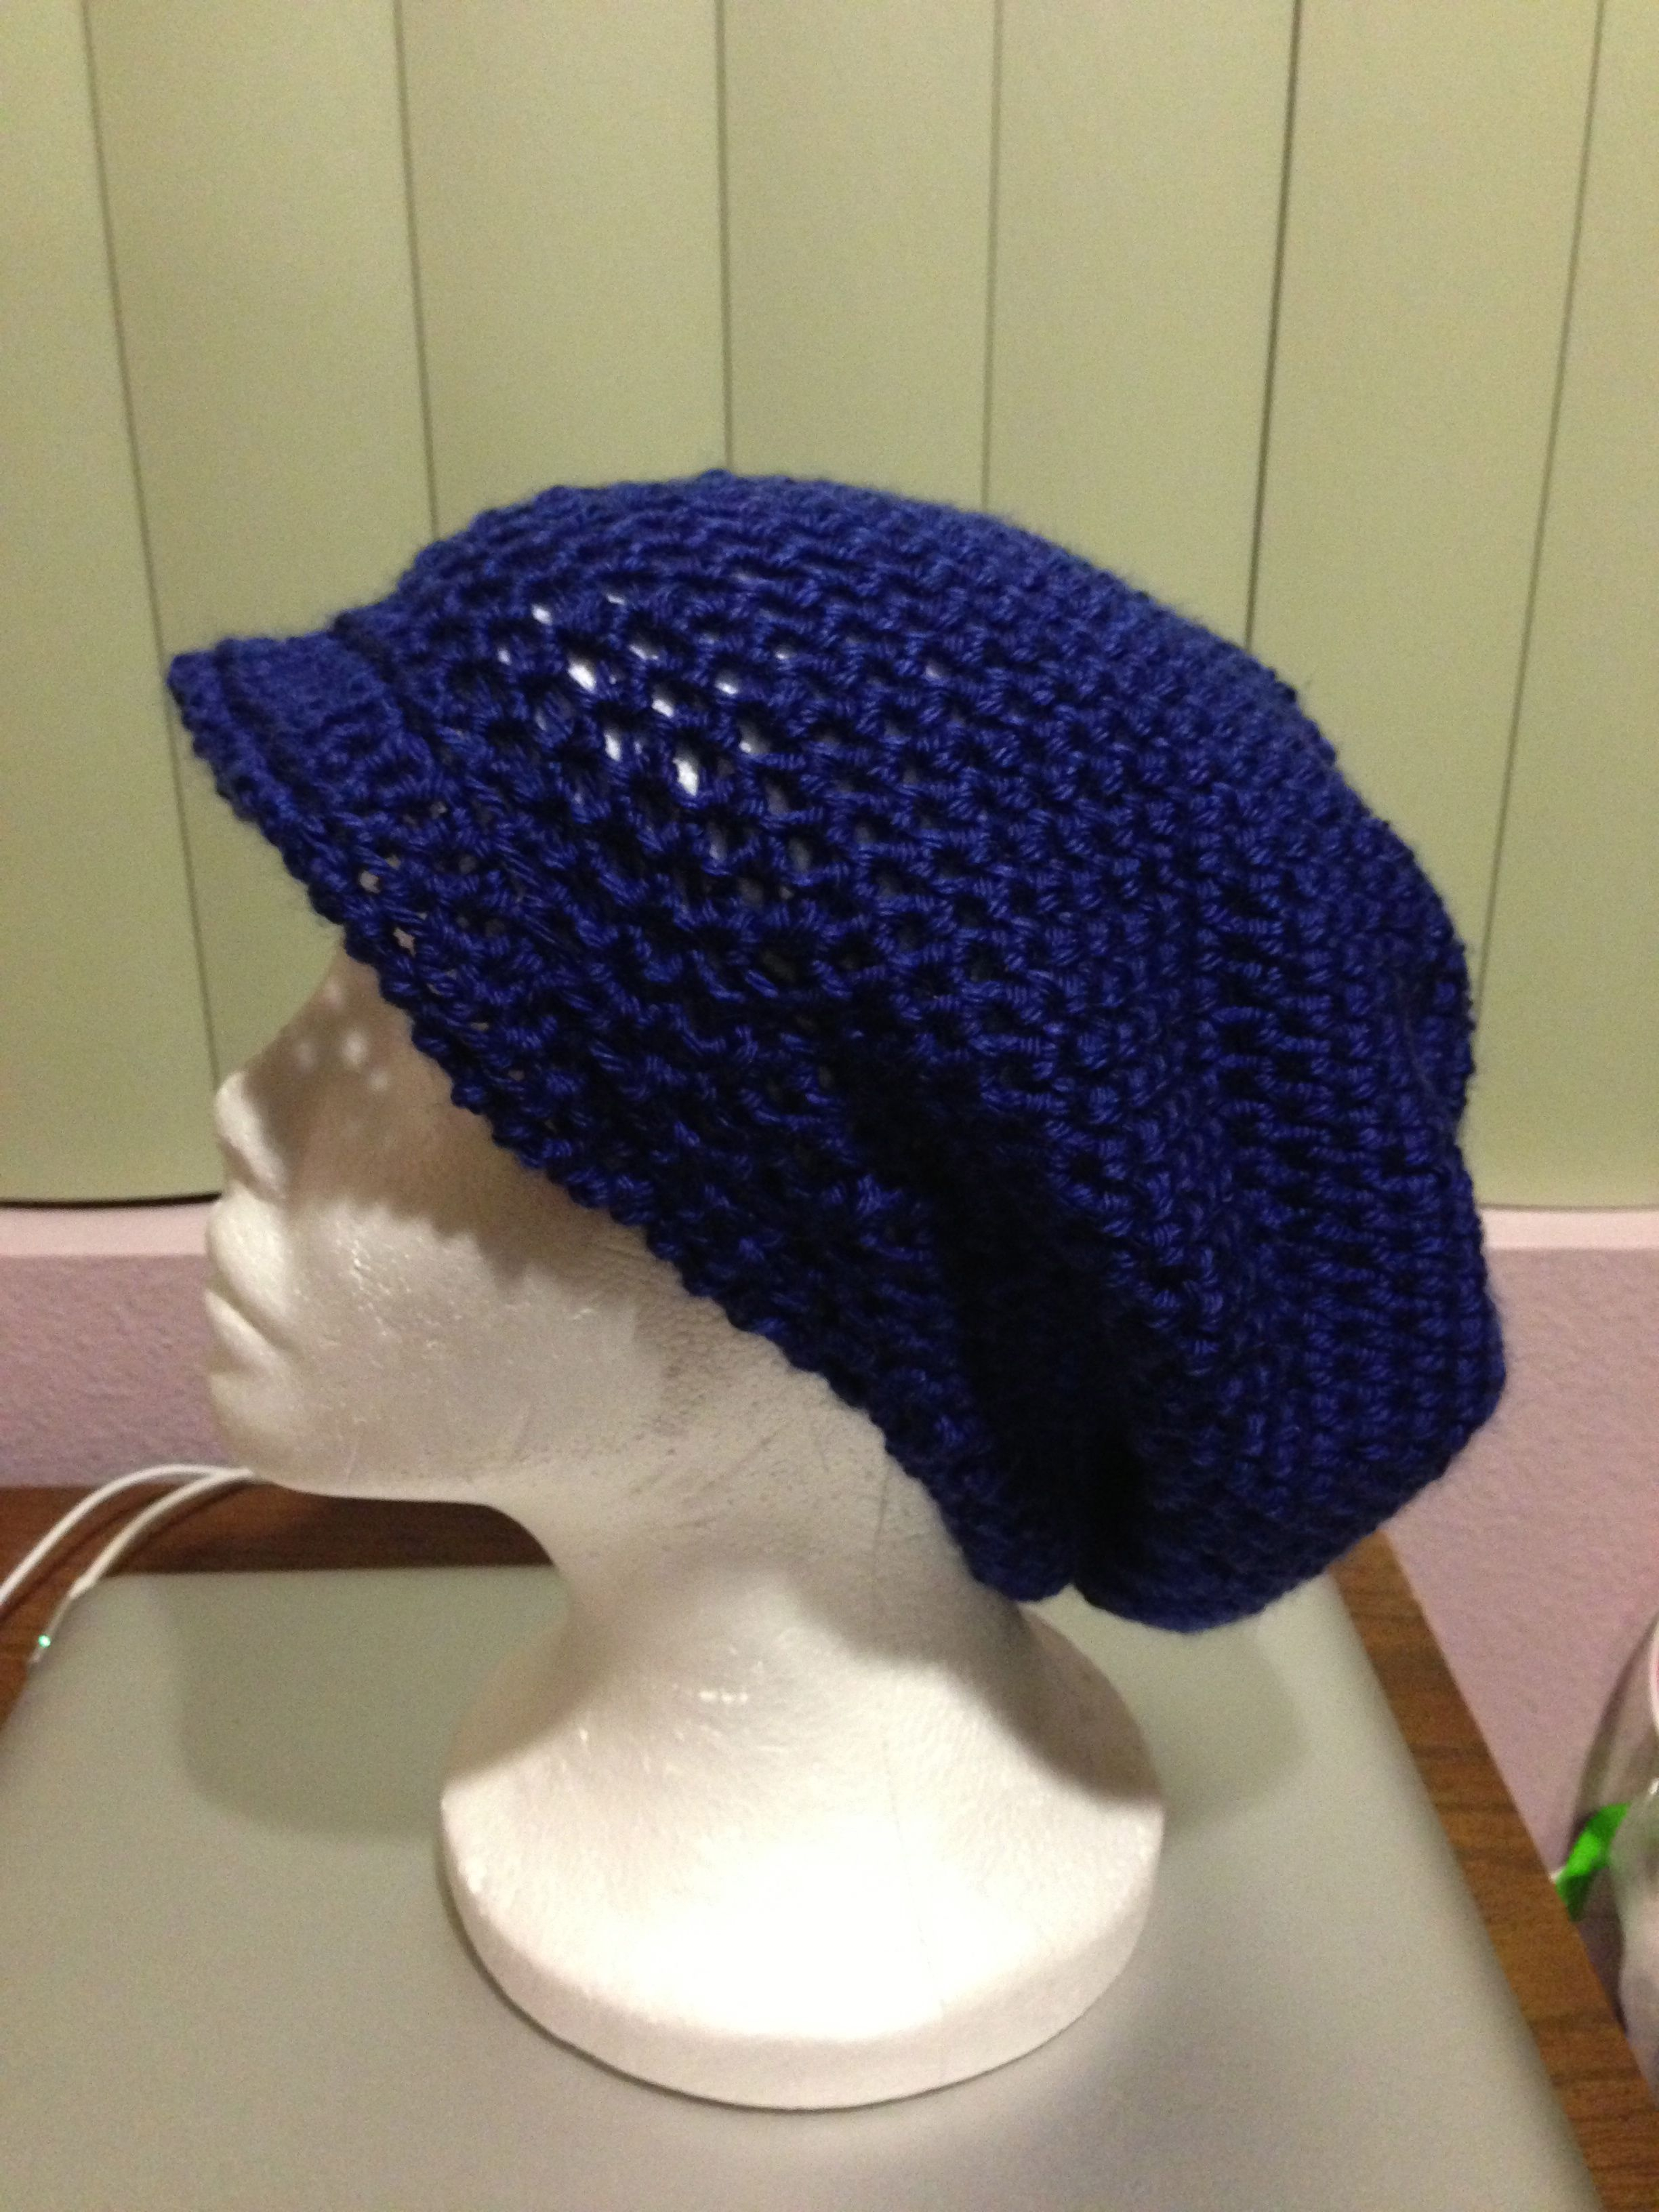 Crochet Slouchy Hat With Brim Pattern Slouchy Hat I Added A Brim To Also Free Pattern For Brim The